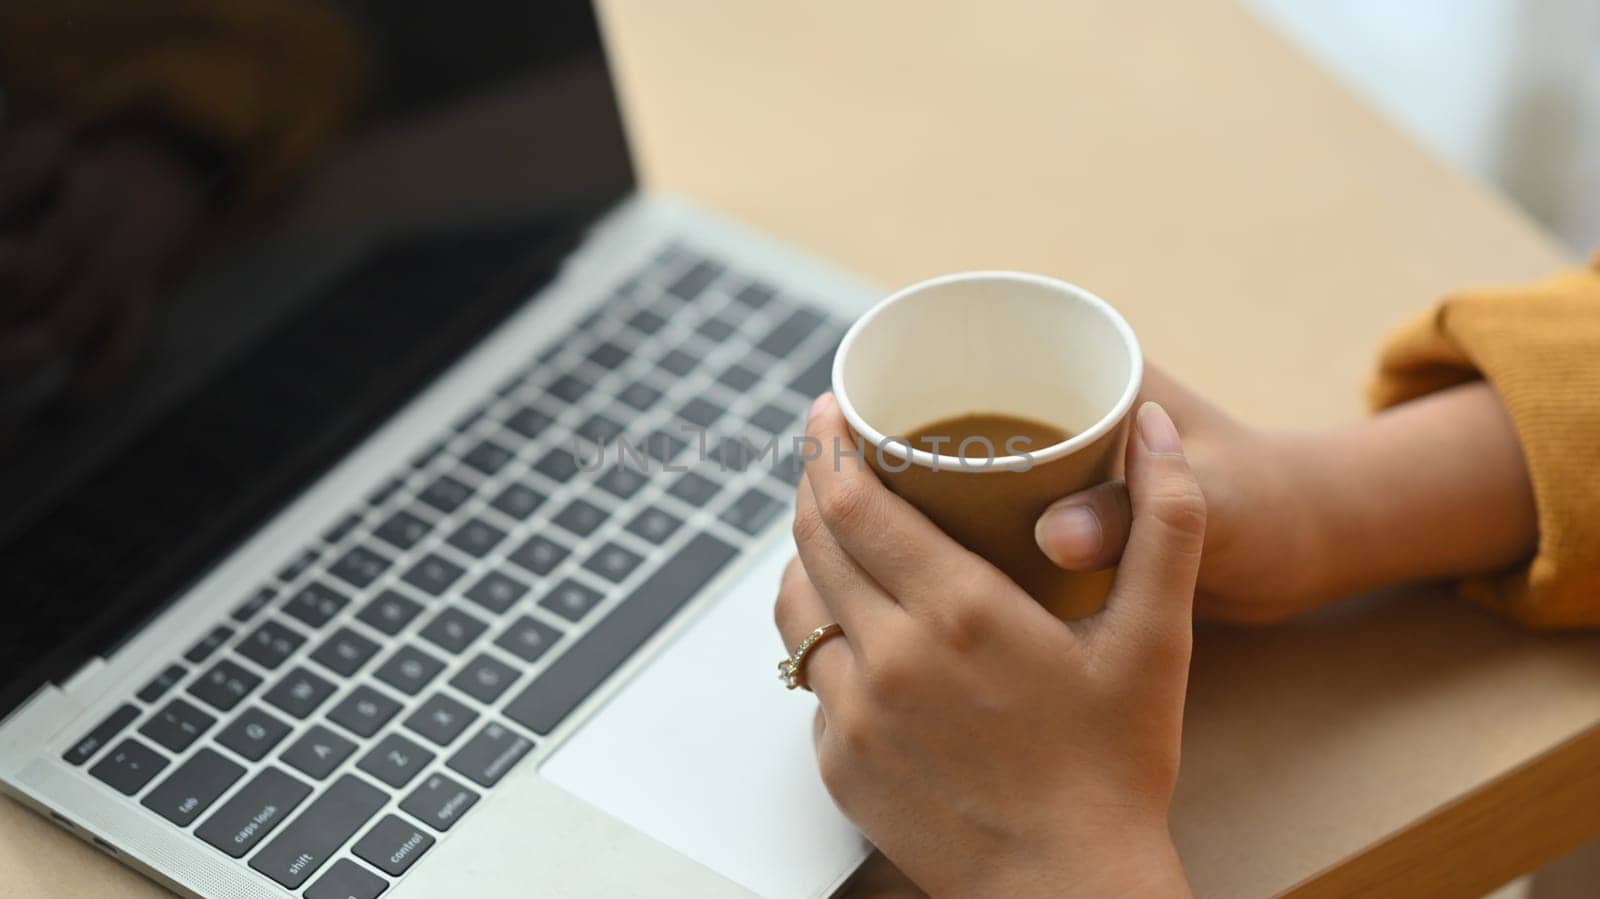 Cropped shot young woman holding coffee cup and using laptop on wooden desk.